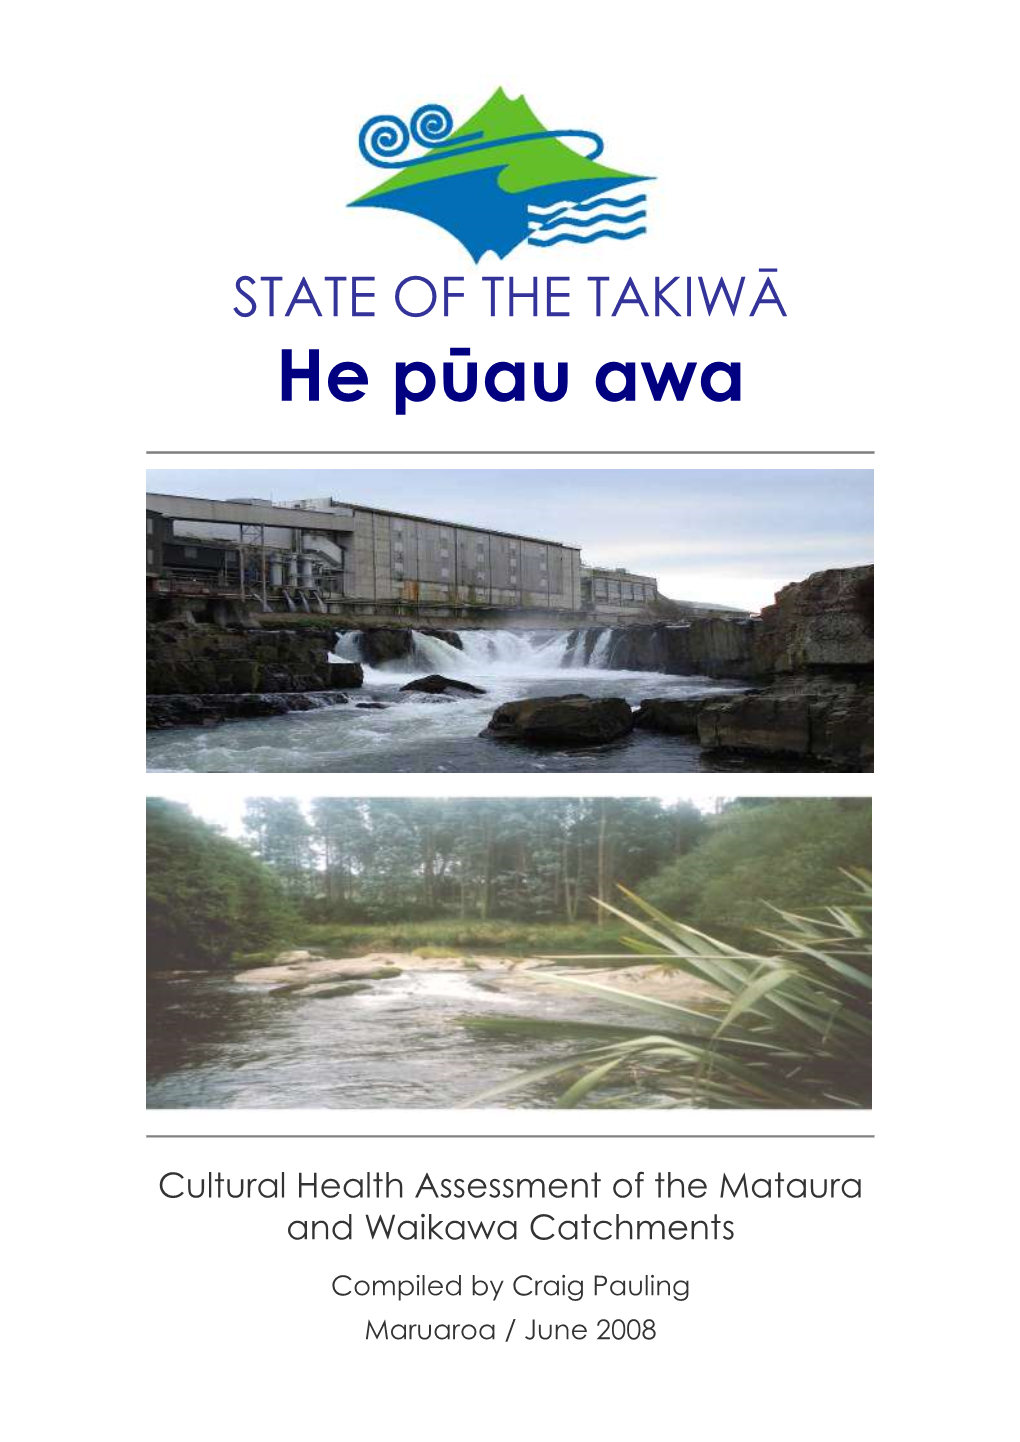 Cultural Health Assessment of the Mataura and Waikawa Catchments I